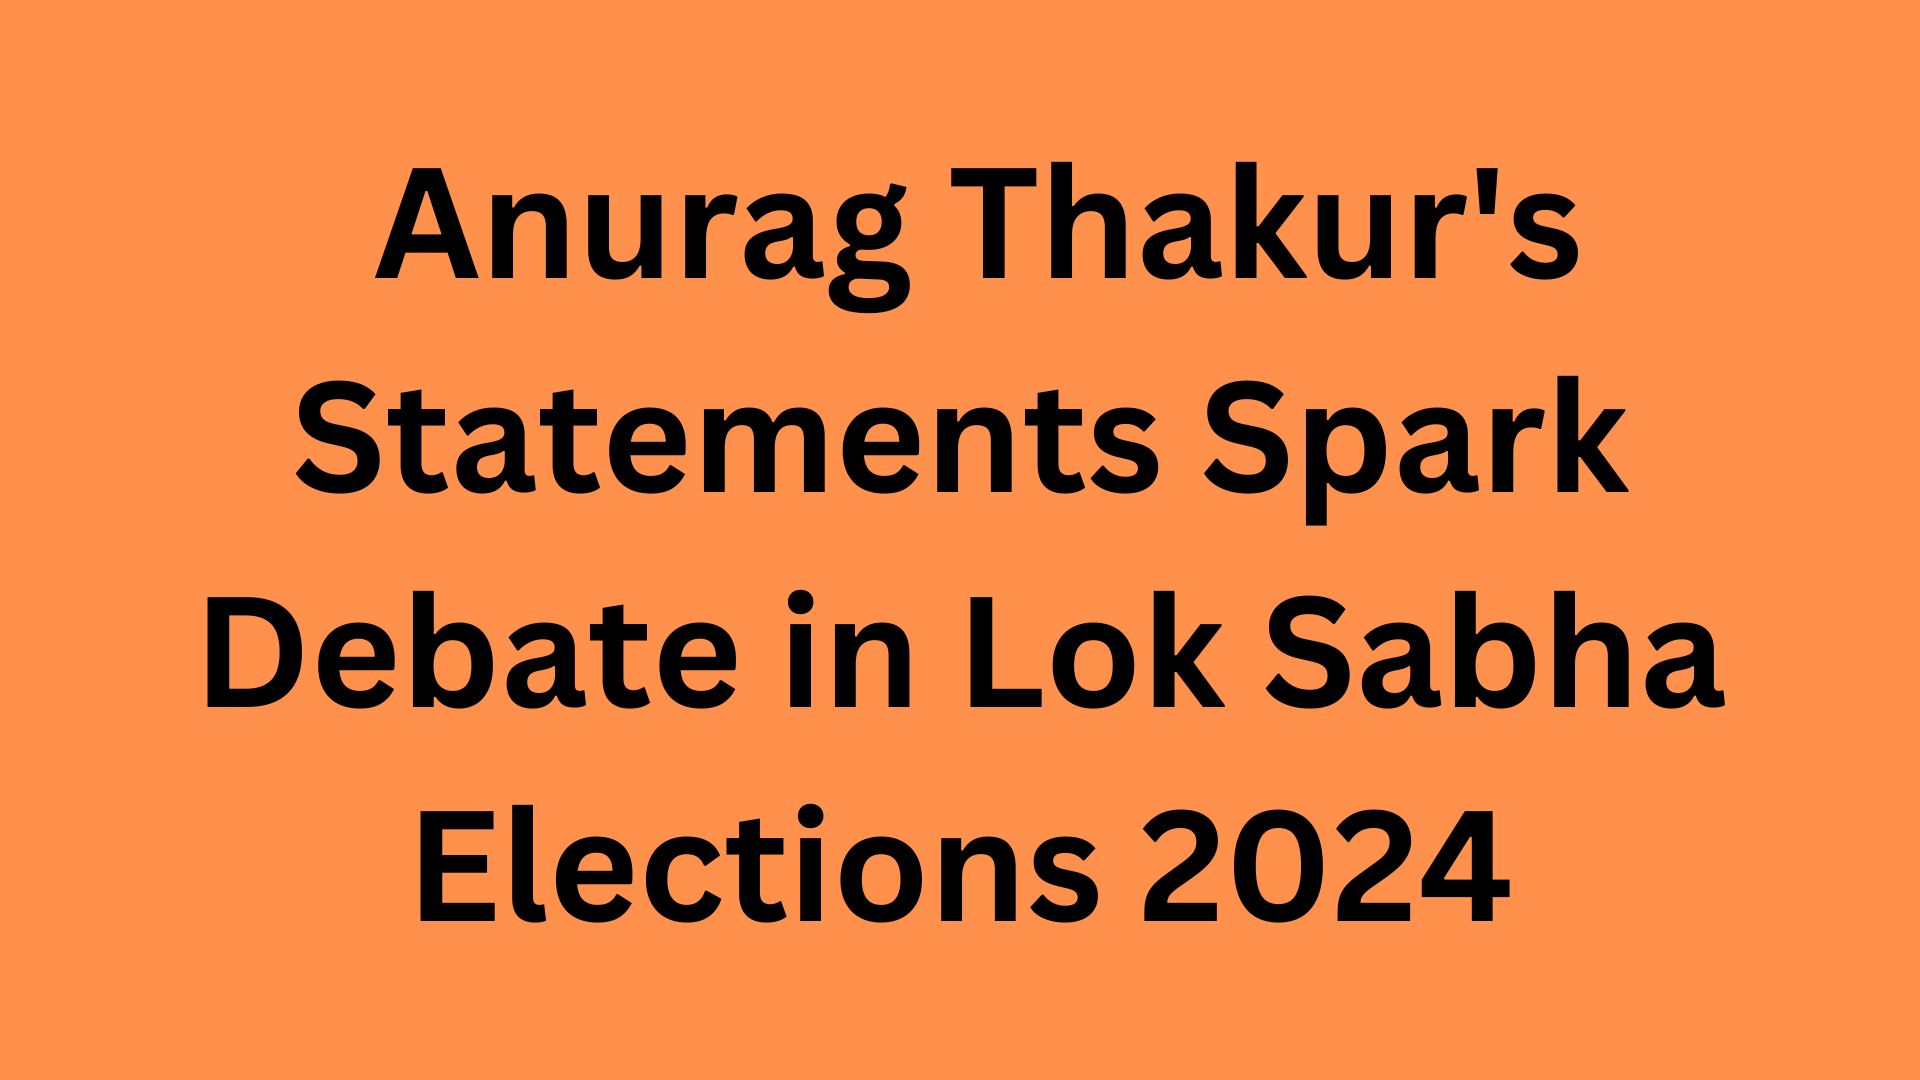 From Manifestos to Foreign Allegations: Anurag Thakur’s Statements Spark Debate in Lok Sabha Elections 2024